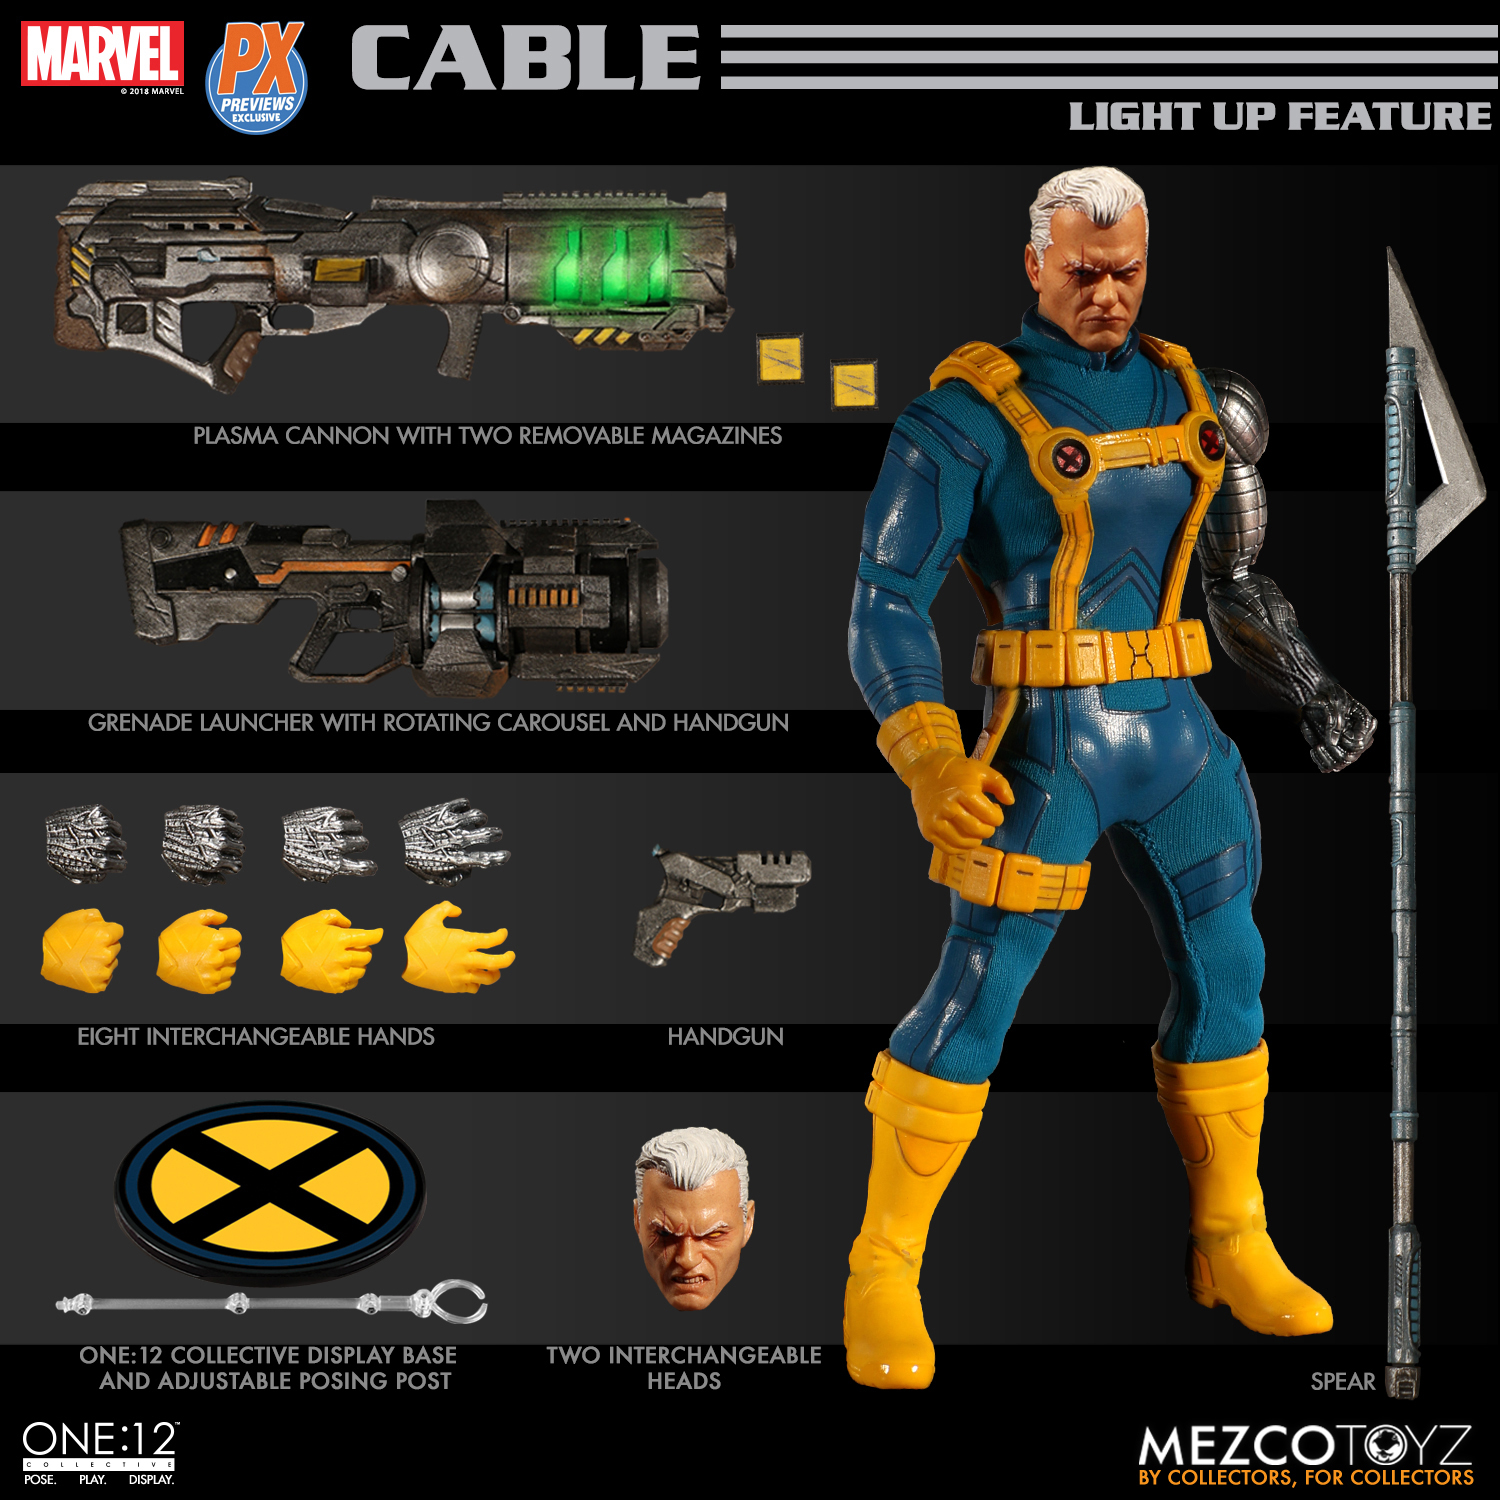 12 Collective Marvel Cable Action Figure for sale online Mezco One 